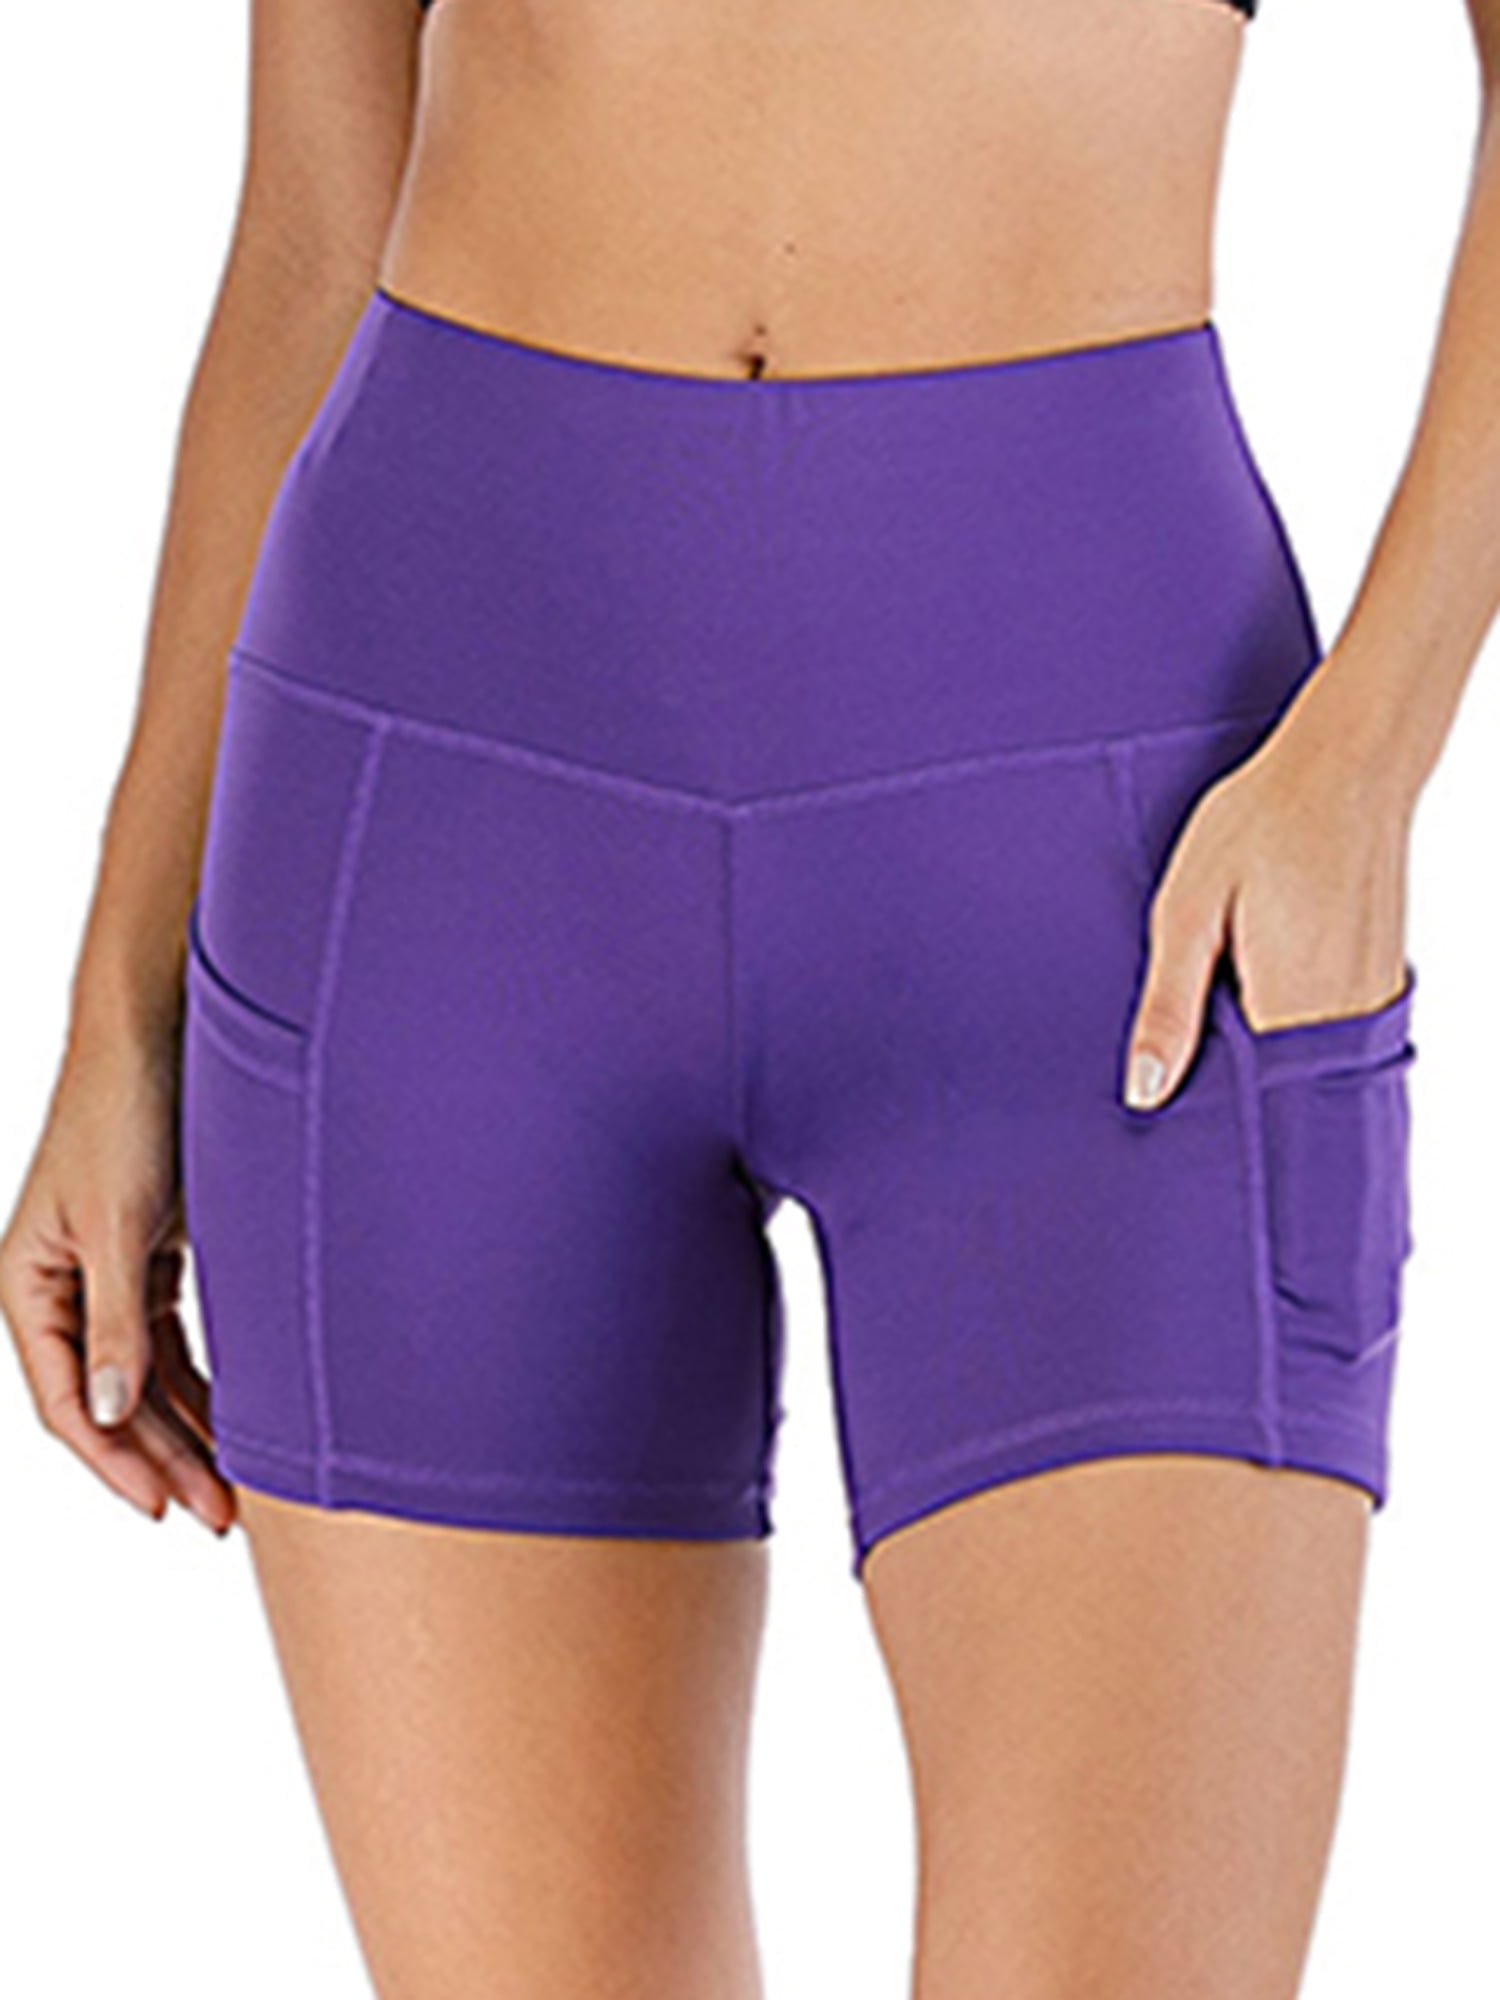 CADMUS High Waist Yoga Shorts for Women Workout Running Shorts Naked  Feeling Biker Shorts Tummy Control Deep Pockets, Rose Red, XS at   Women's Clothing store